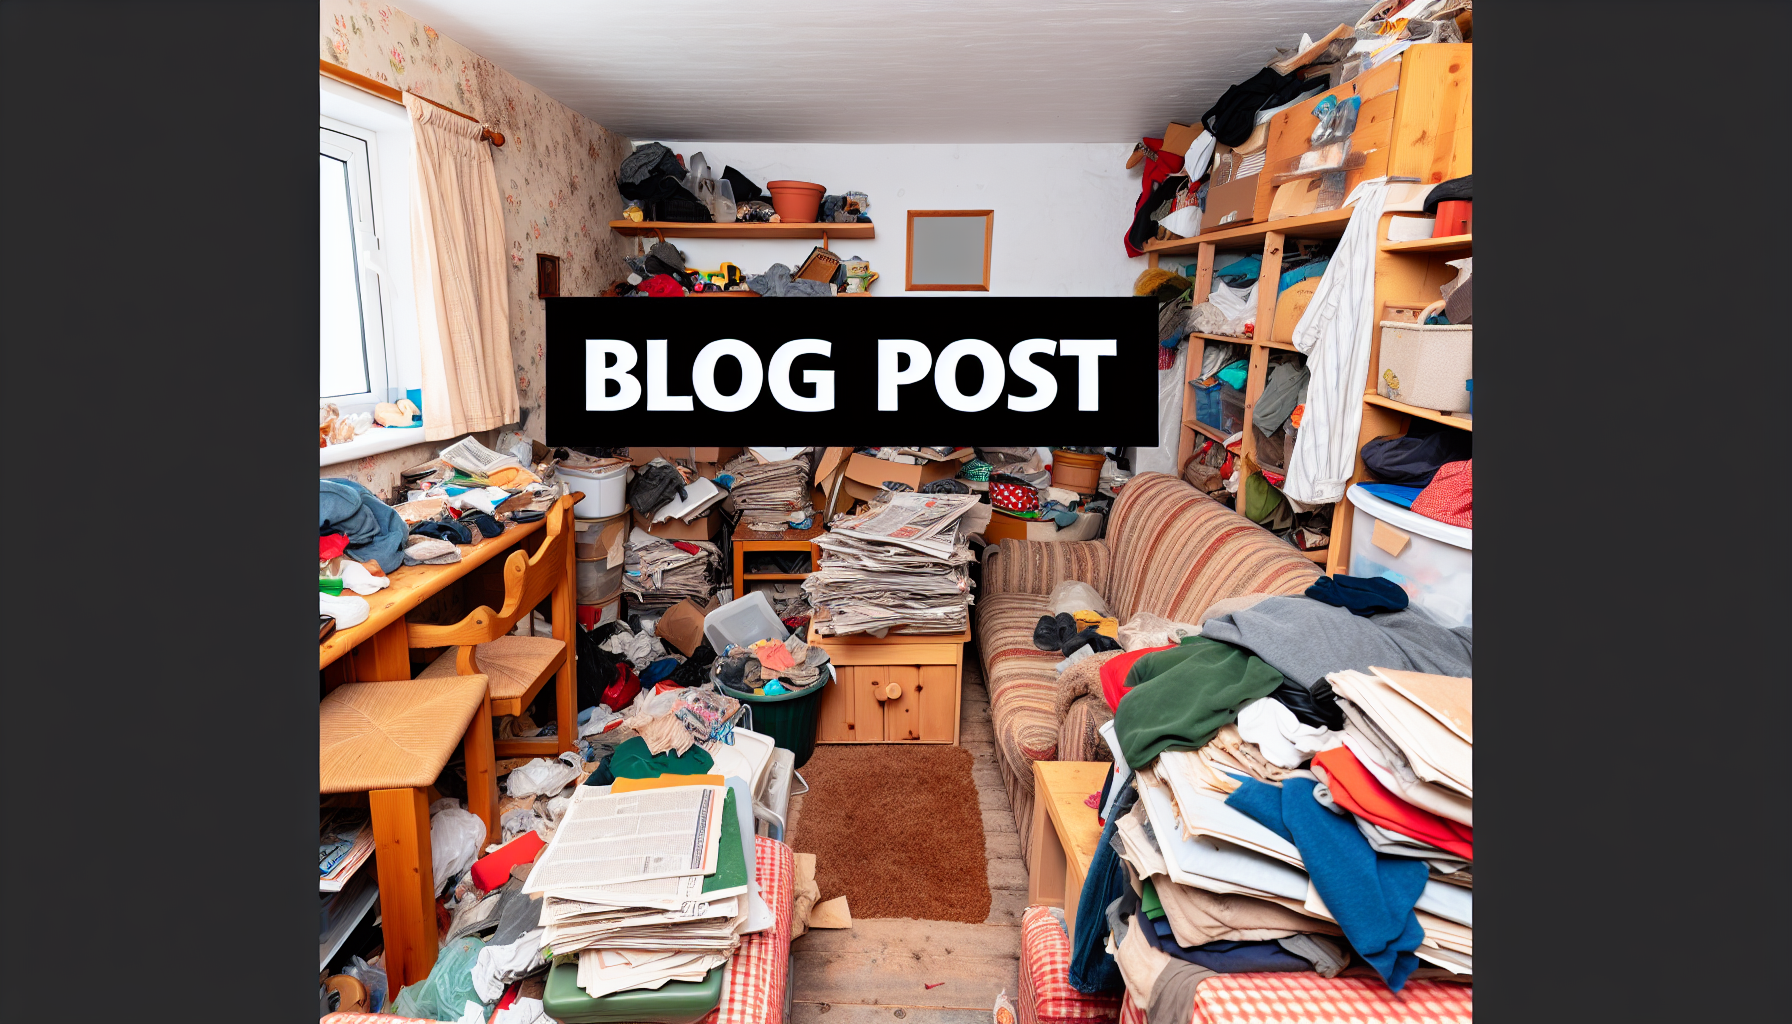 Photo of a cluttered and hazardous living space